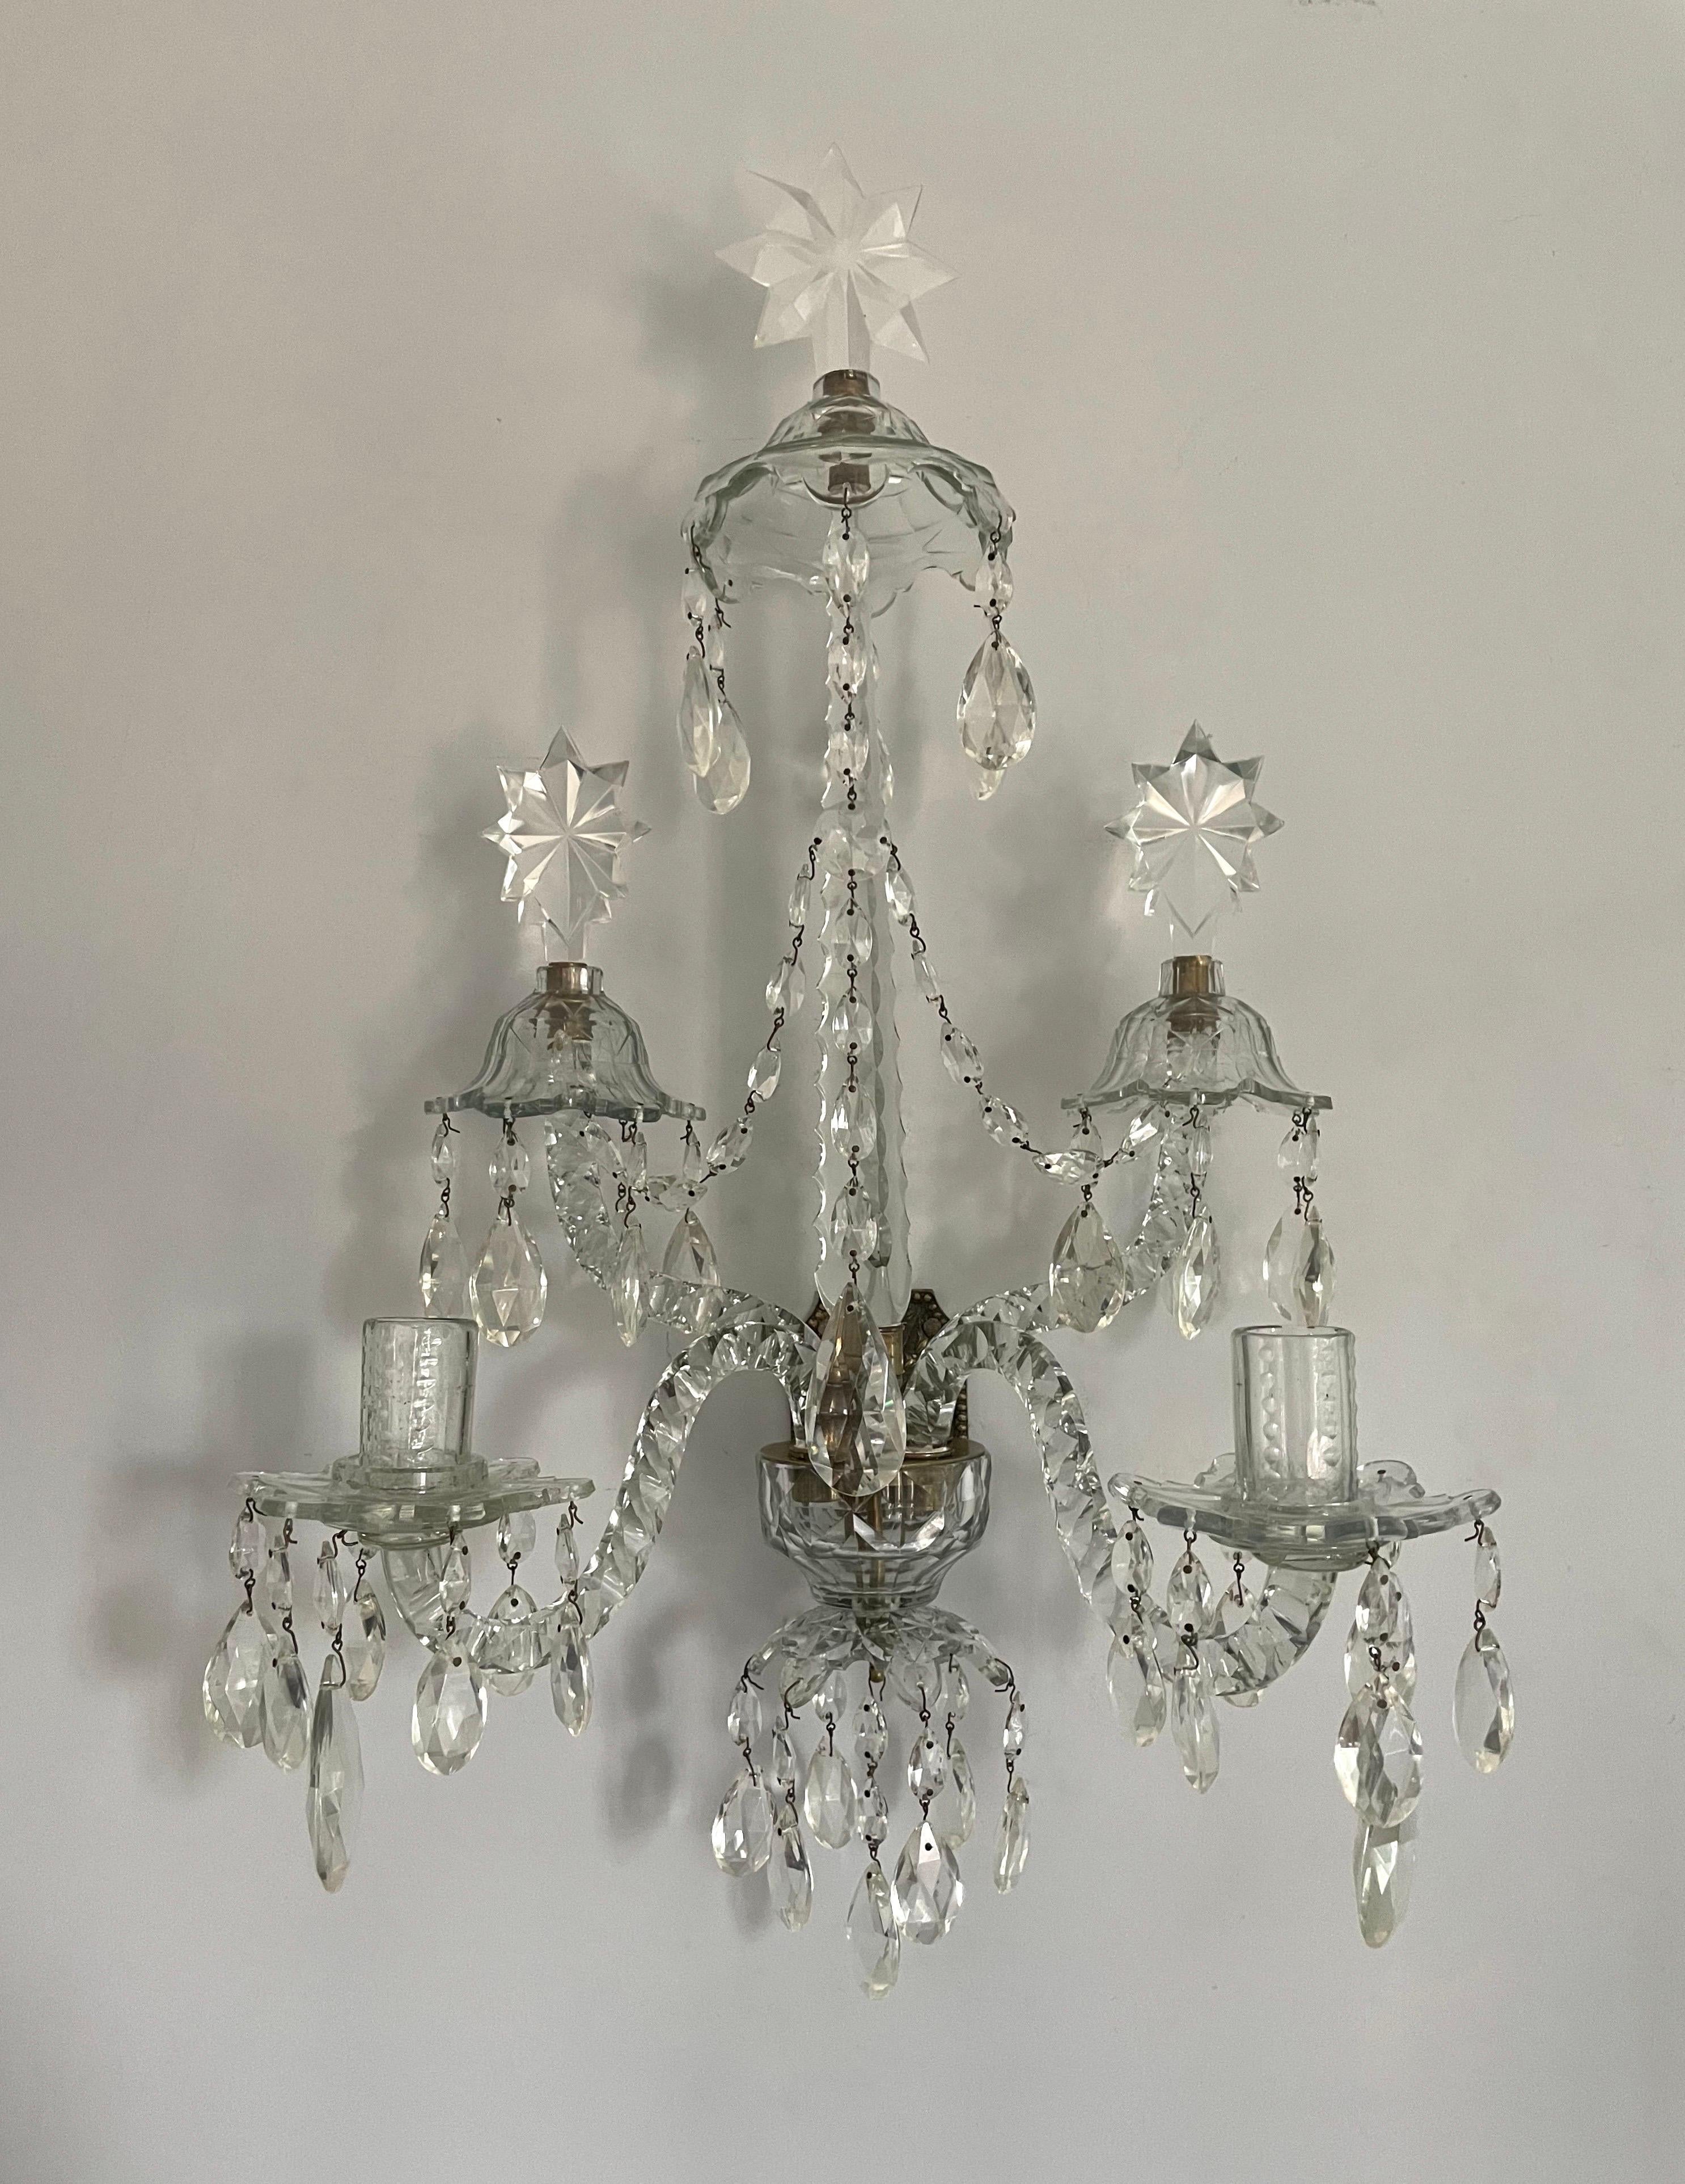 Exquisite, single English antique crystal sconce in the neoclassical style. 

This beautiful wall sconce consists of delicately hand-cut details throughout its structure. The center finial is crowned with an etched star as are two “swan neck” arms